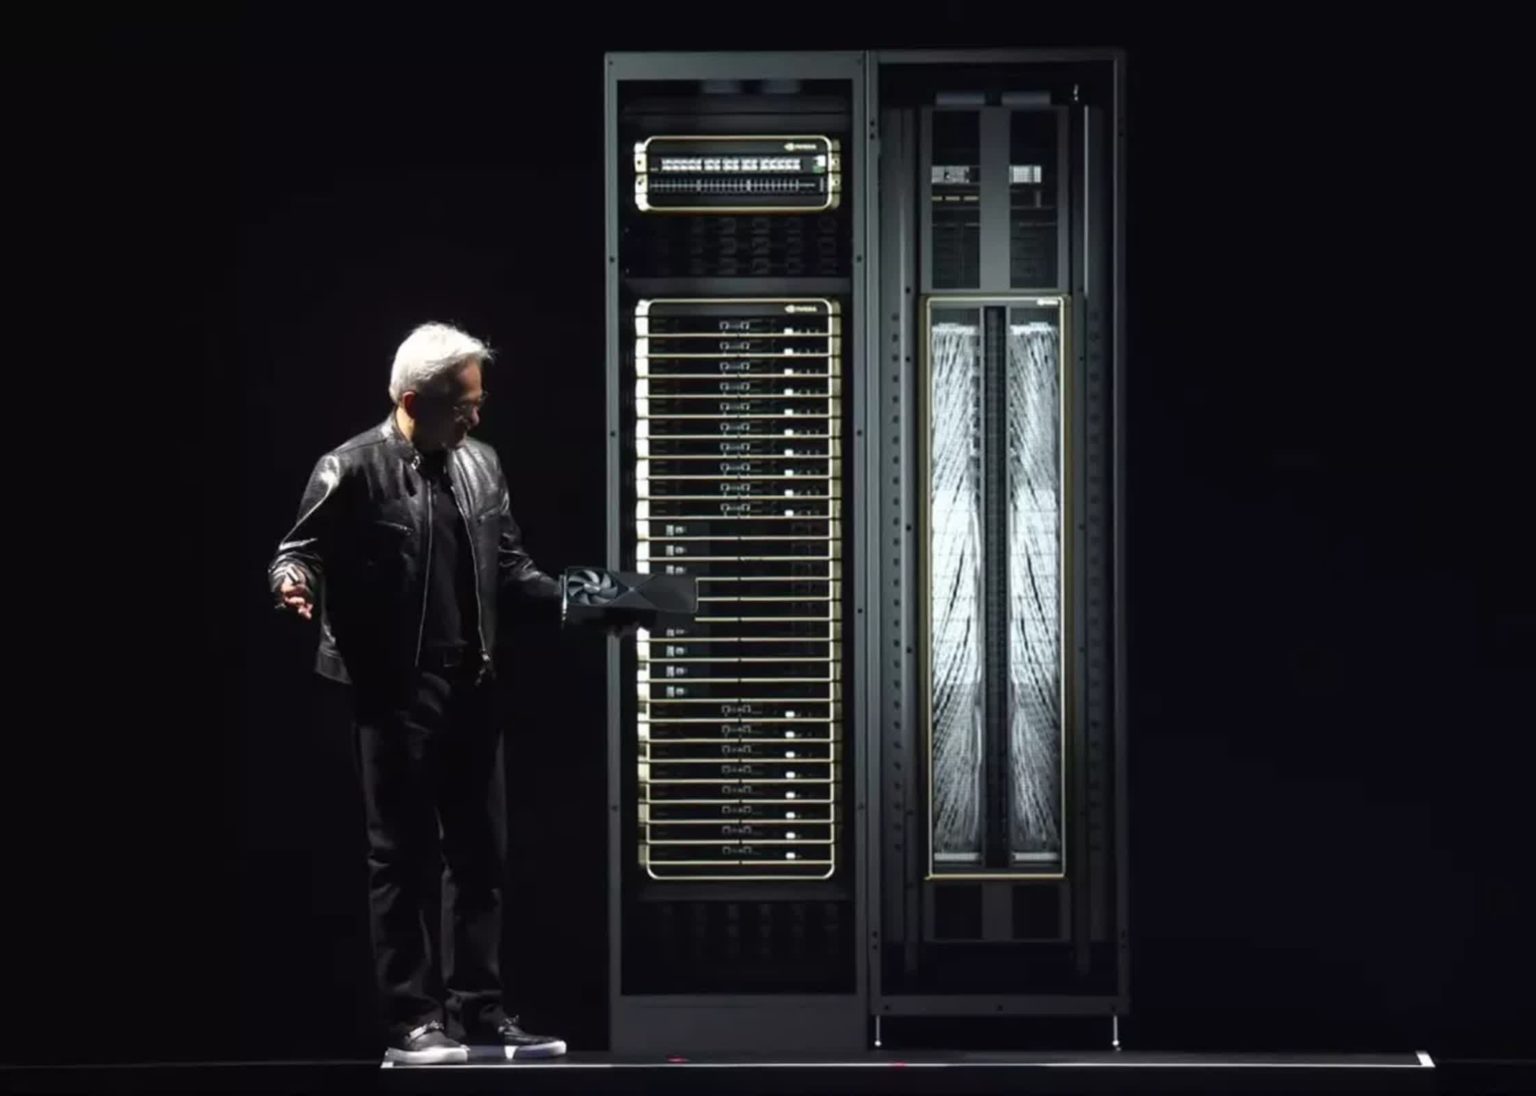 Nvidia Blackwell server cabinets could cost somewhere around $2 to $3 million each